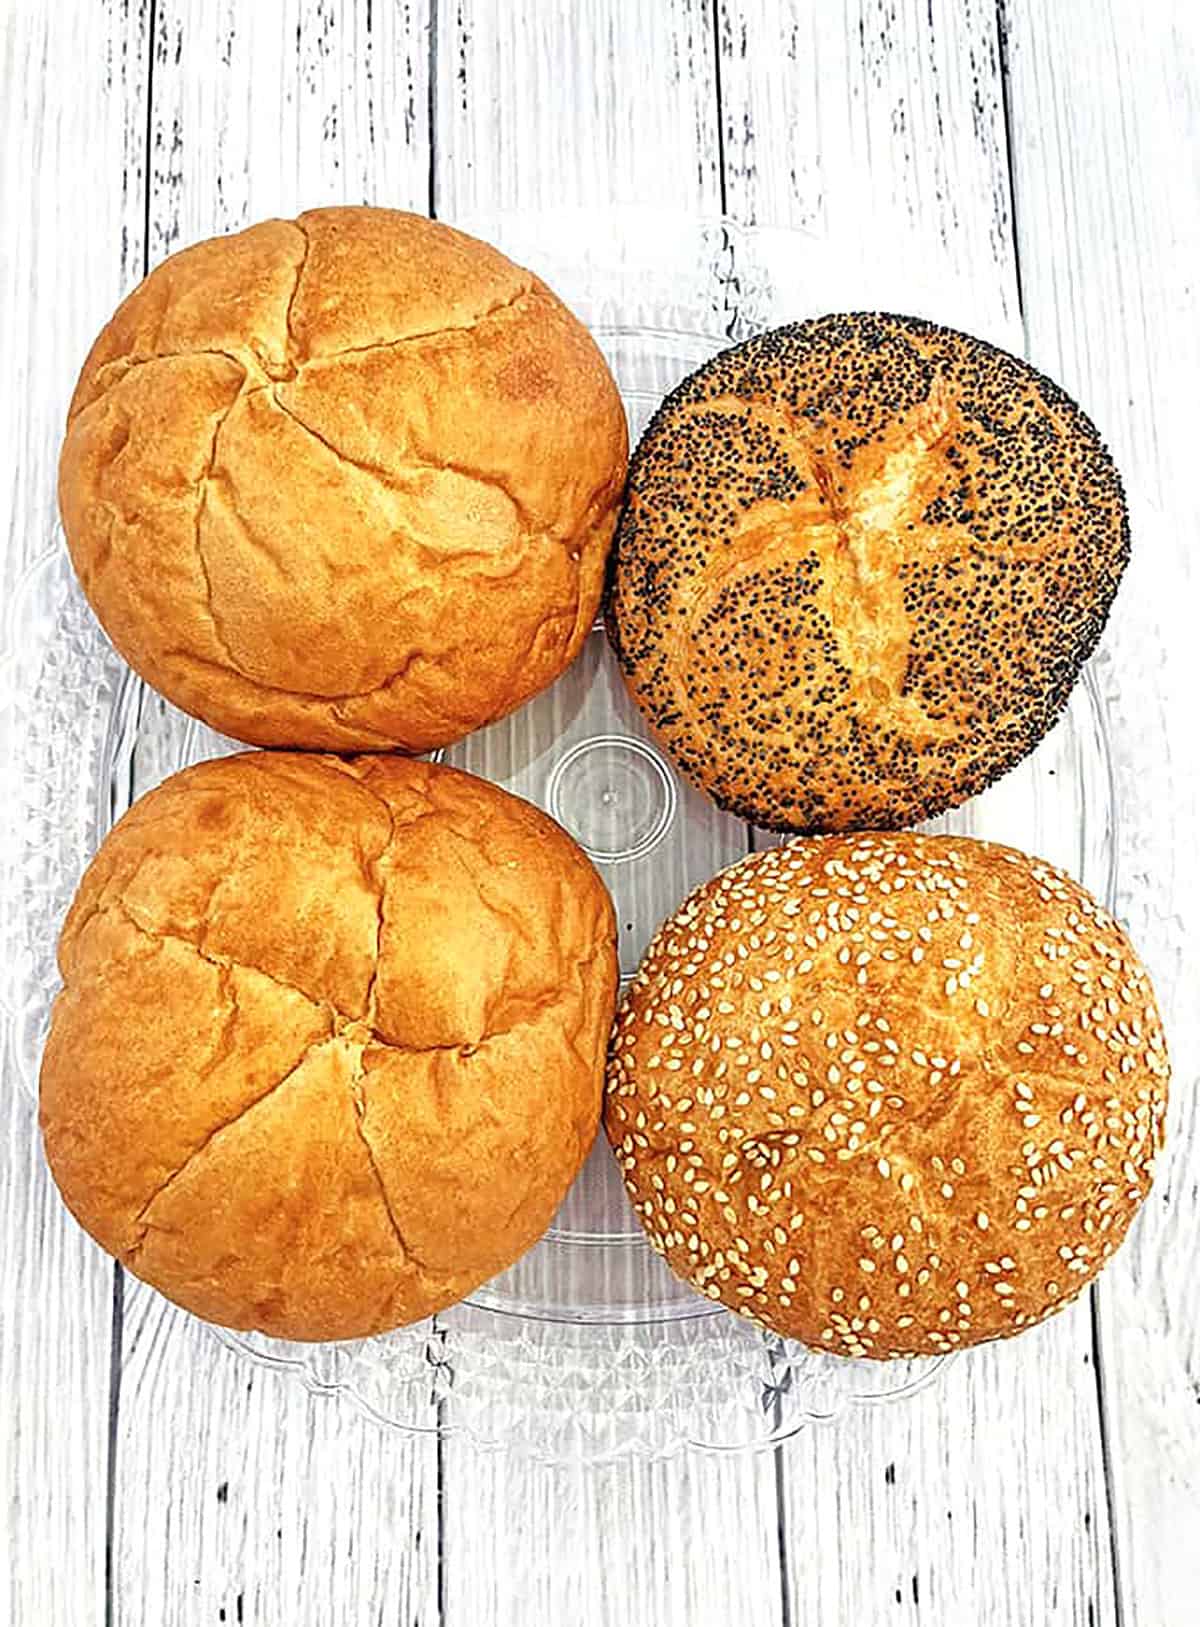 We'll need some bread buns to load all the ingredients on. Grab your favorite from the store or make your own homemade burger buns.